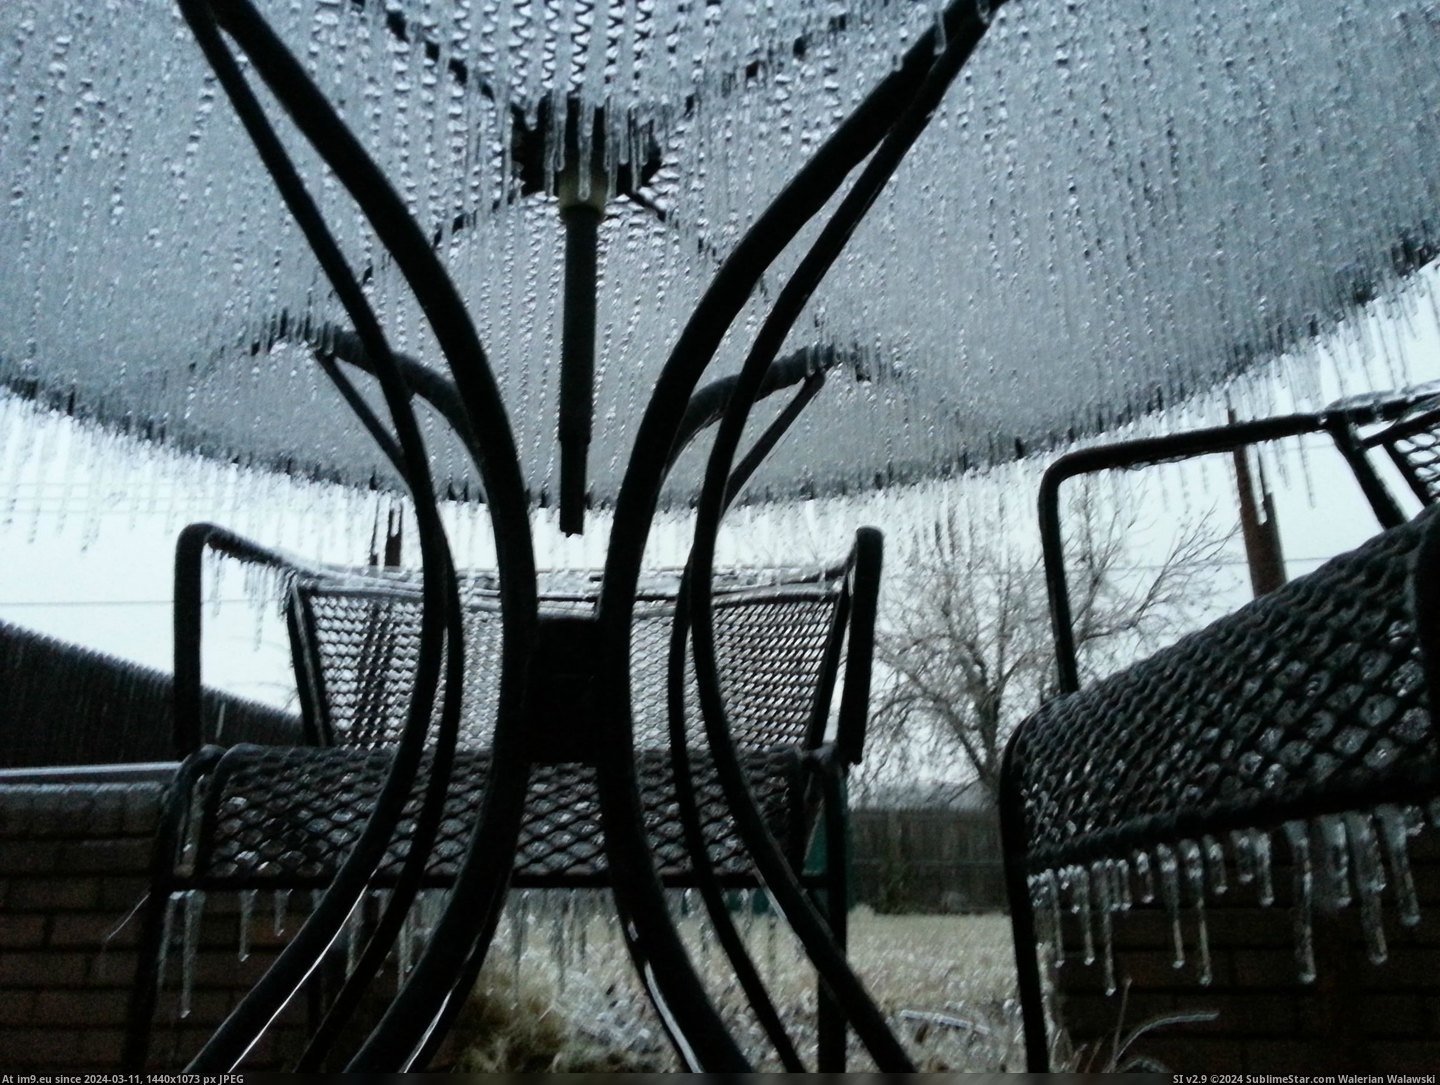 #Ice #Storm #Mesh #Furniture #Patio [Mildlyinteresting] This is what happens to mesh patio furniture in an ice storm 3 Pic. (Изображение из альбом My r/MILDLYINTERESTING favs))